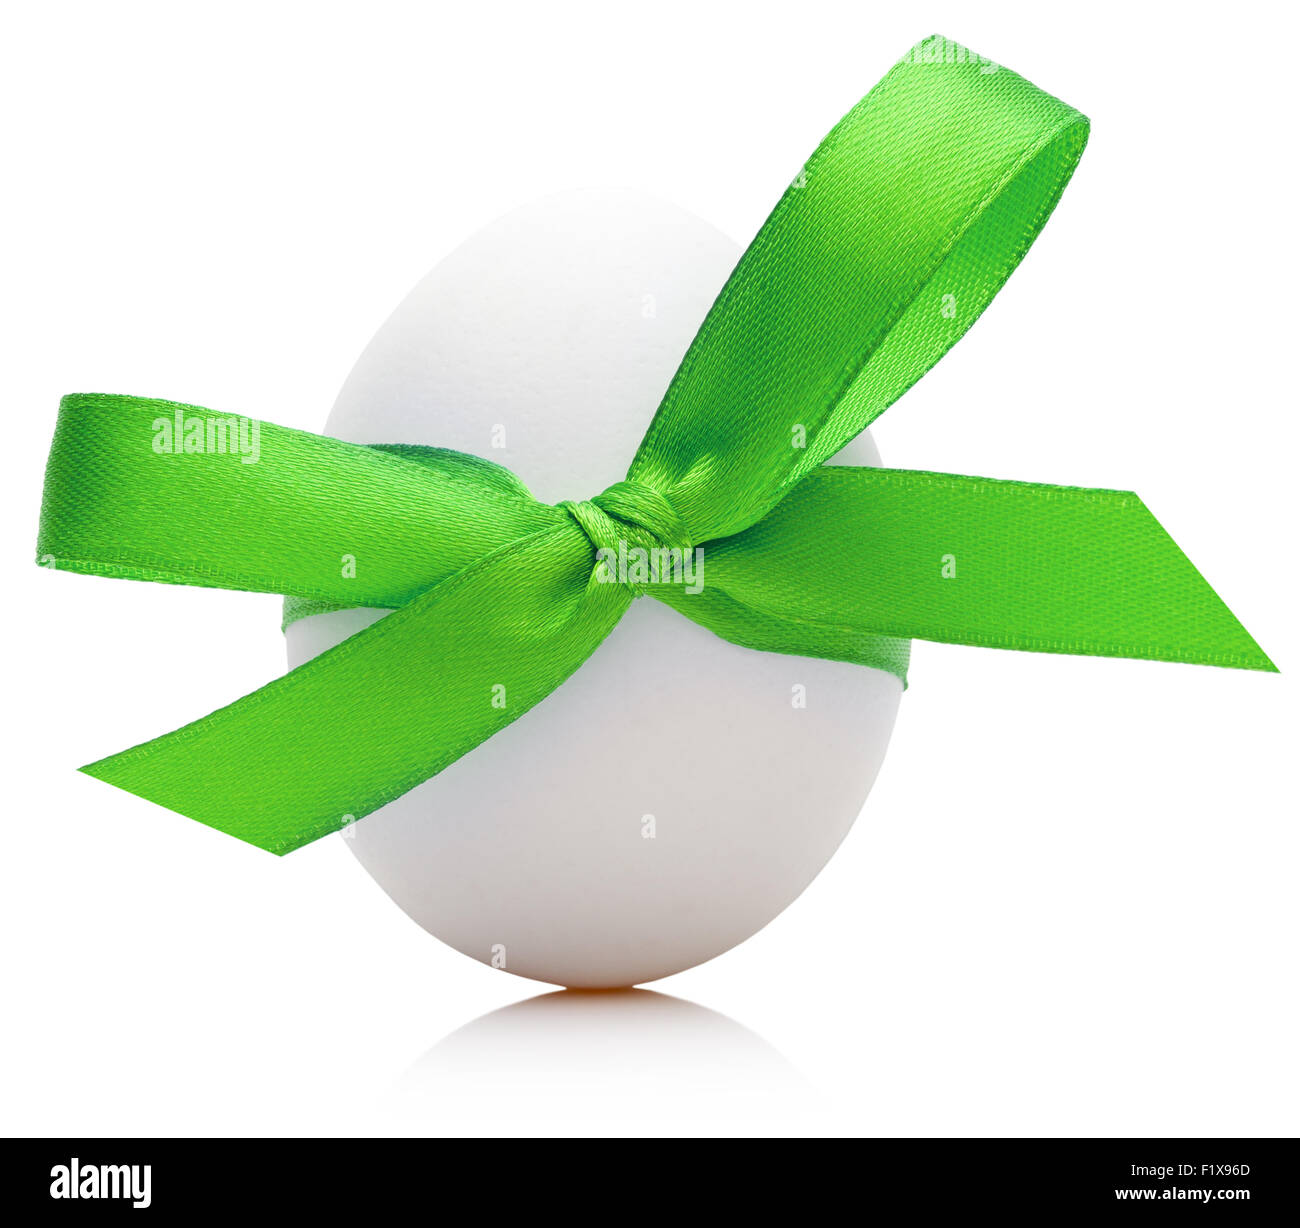 Easter egg with festive green bow isolated on white background. Stock Photo